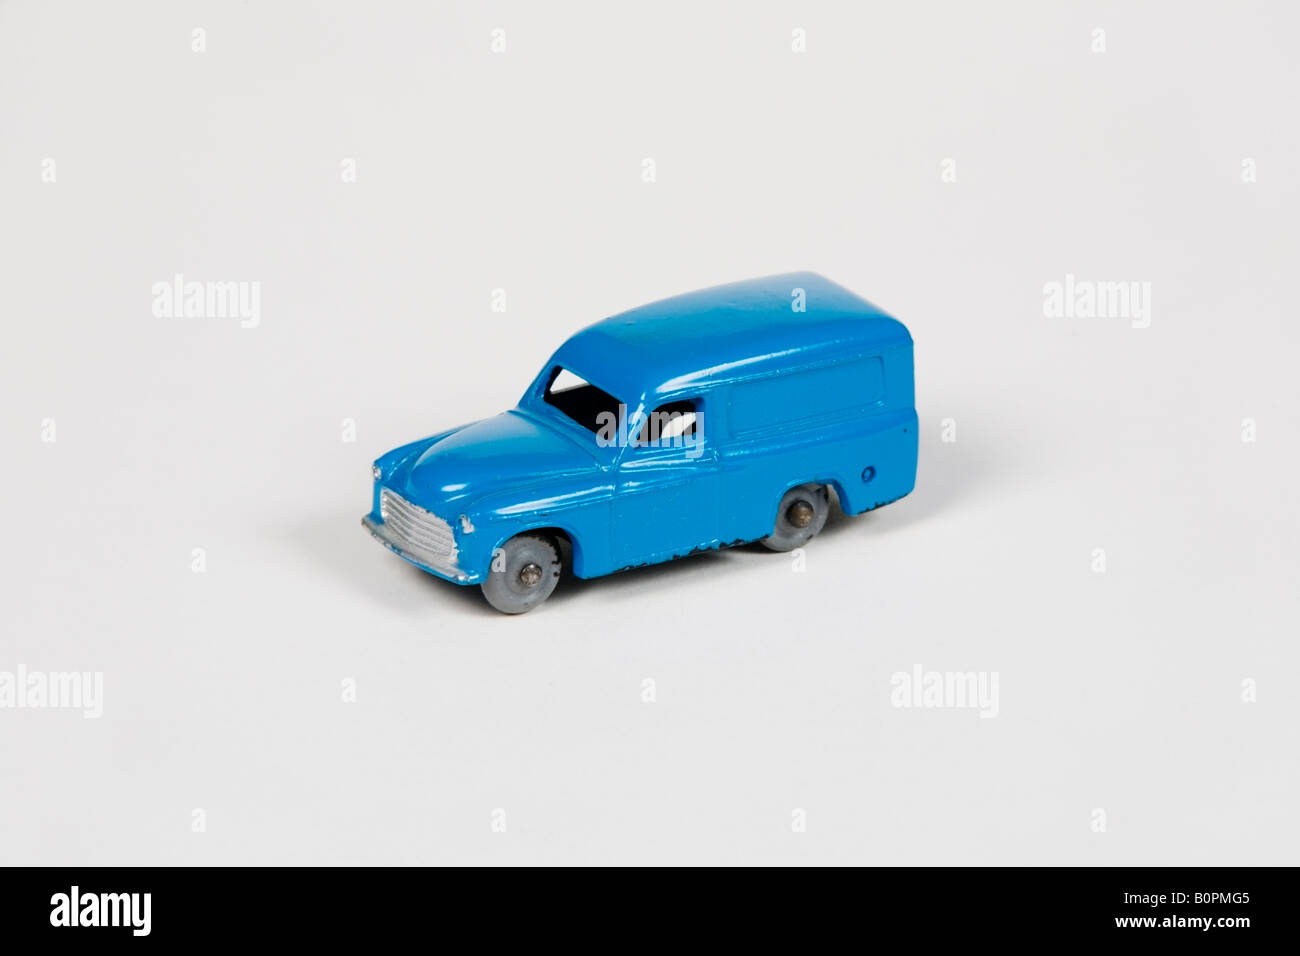 a blue Hornby Dublo Commer retro toy van on white background Stock Photo